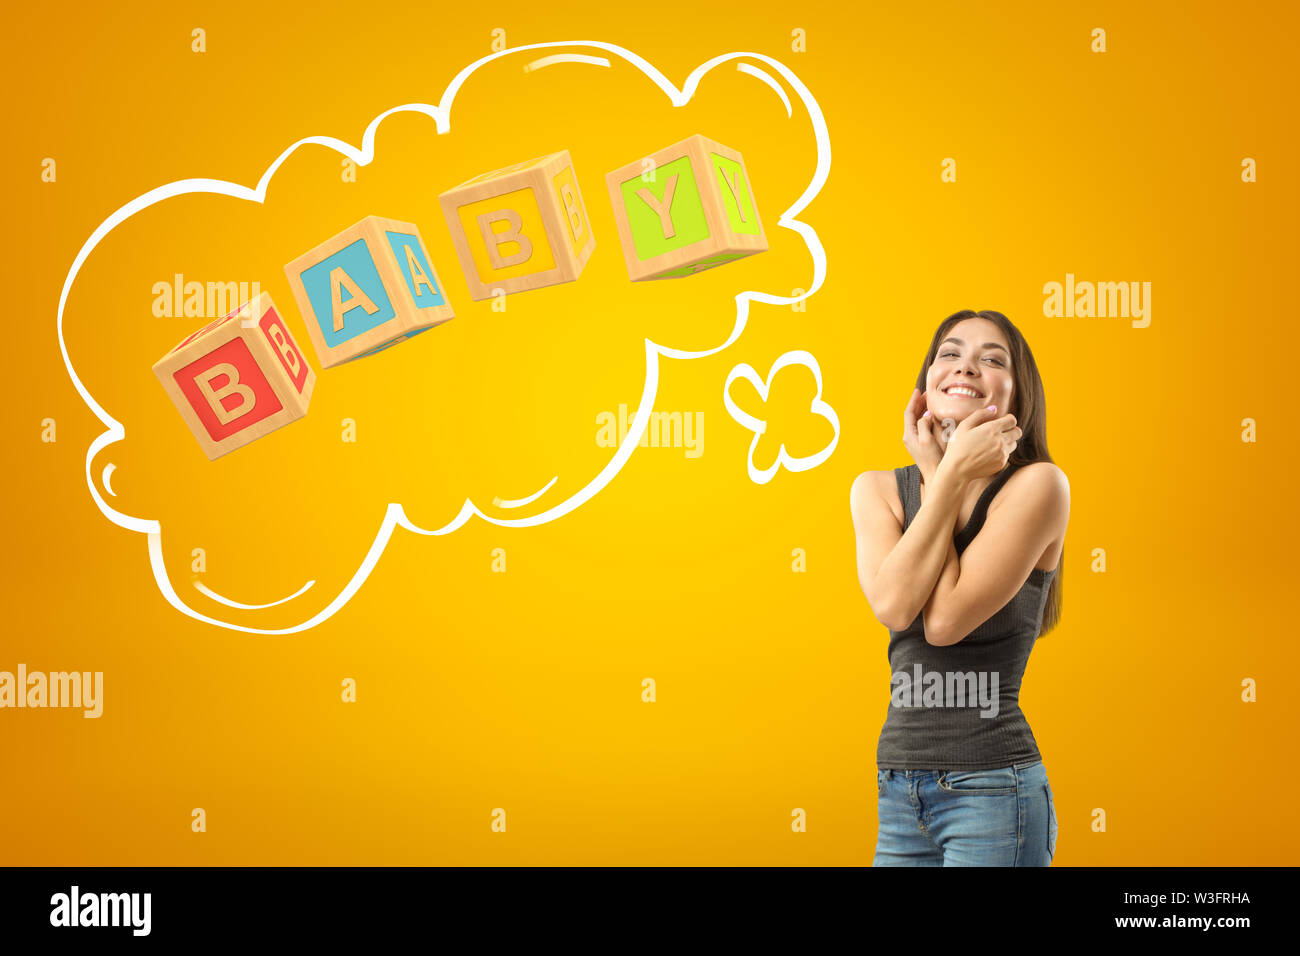 Young happy brunette girl in casual clothes with BABY toy blocks sign on yellow background Stock Photo